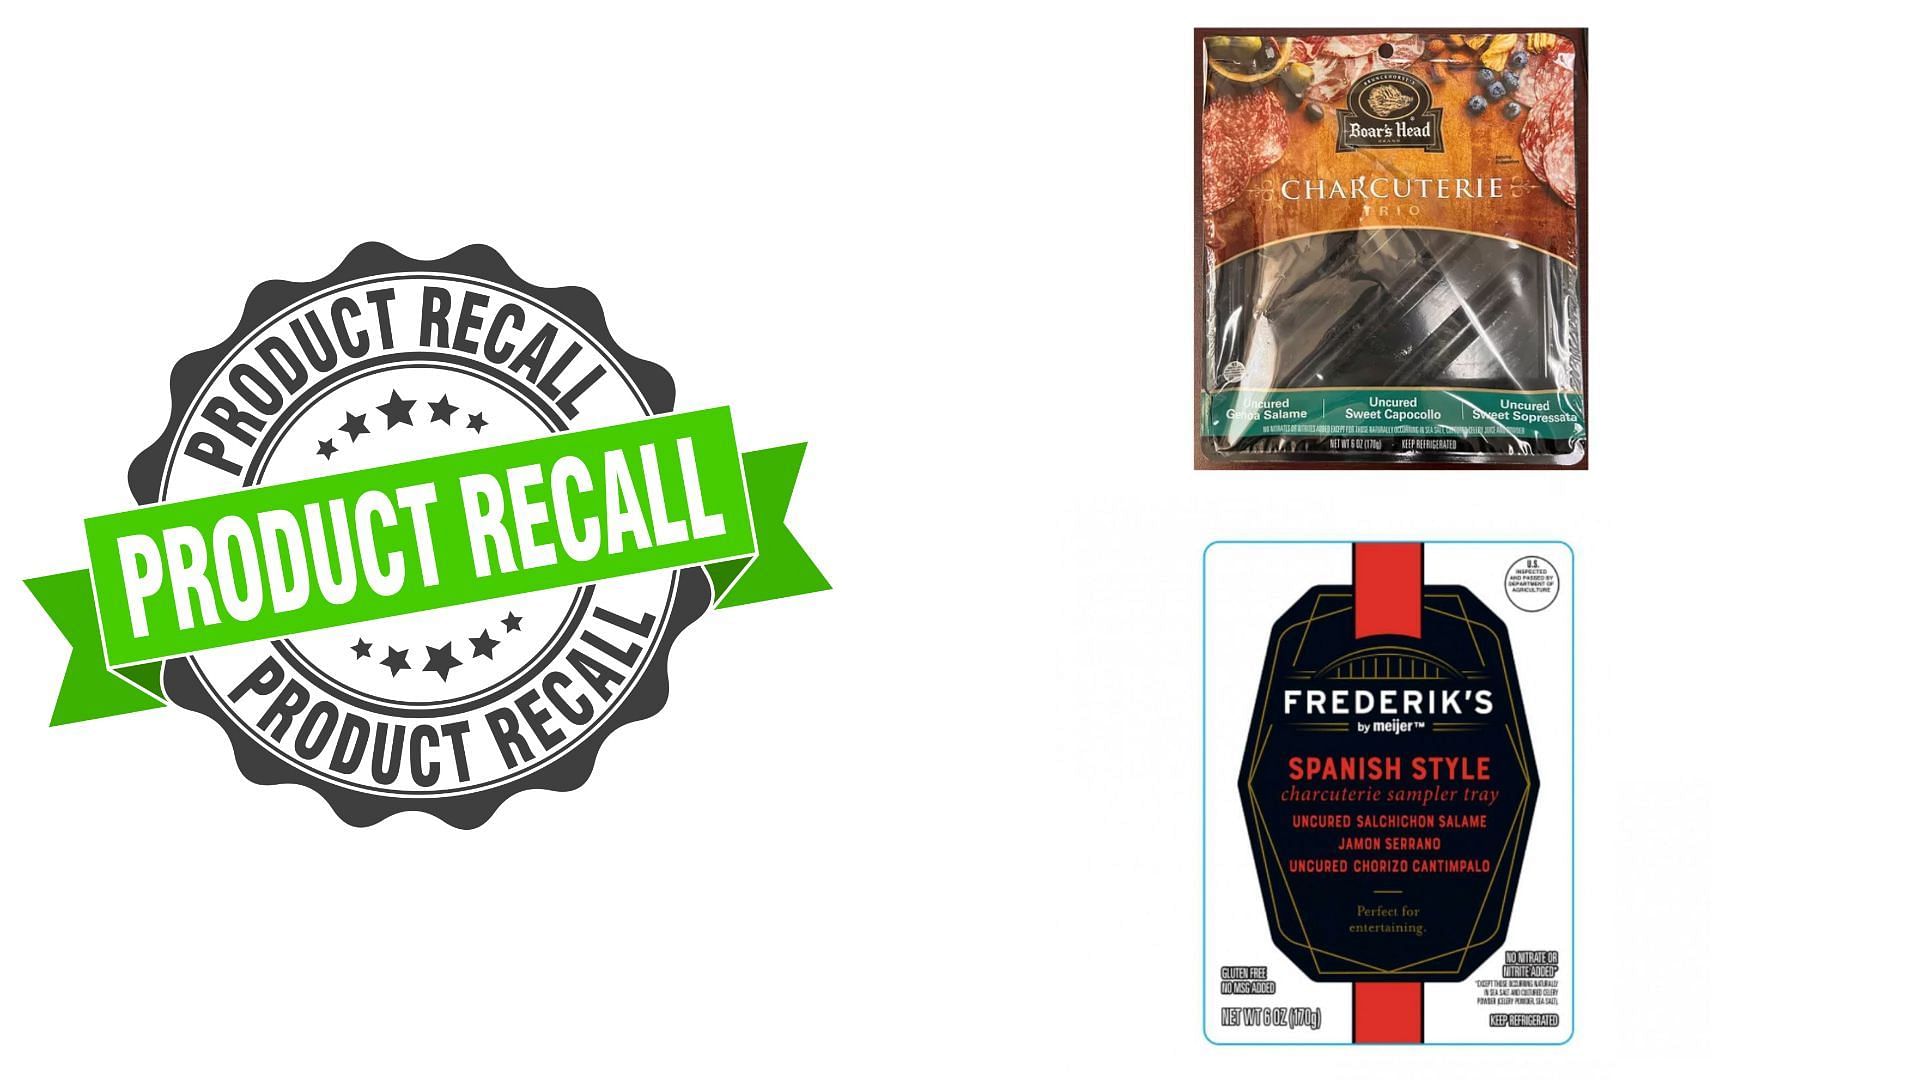 Daniele International LLC issued a nationwide recall for over 52,000 pounds of ready-to-eat charcuterie sausage and salami over concerns of a potential listeria monocytogen contamination (Image via FSIS)